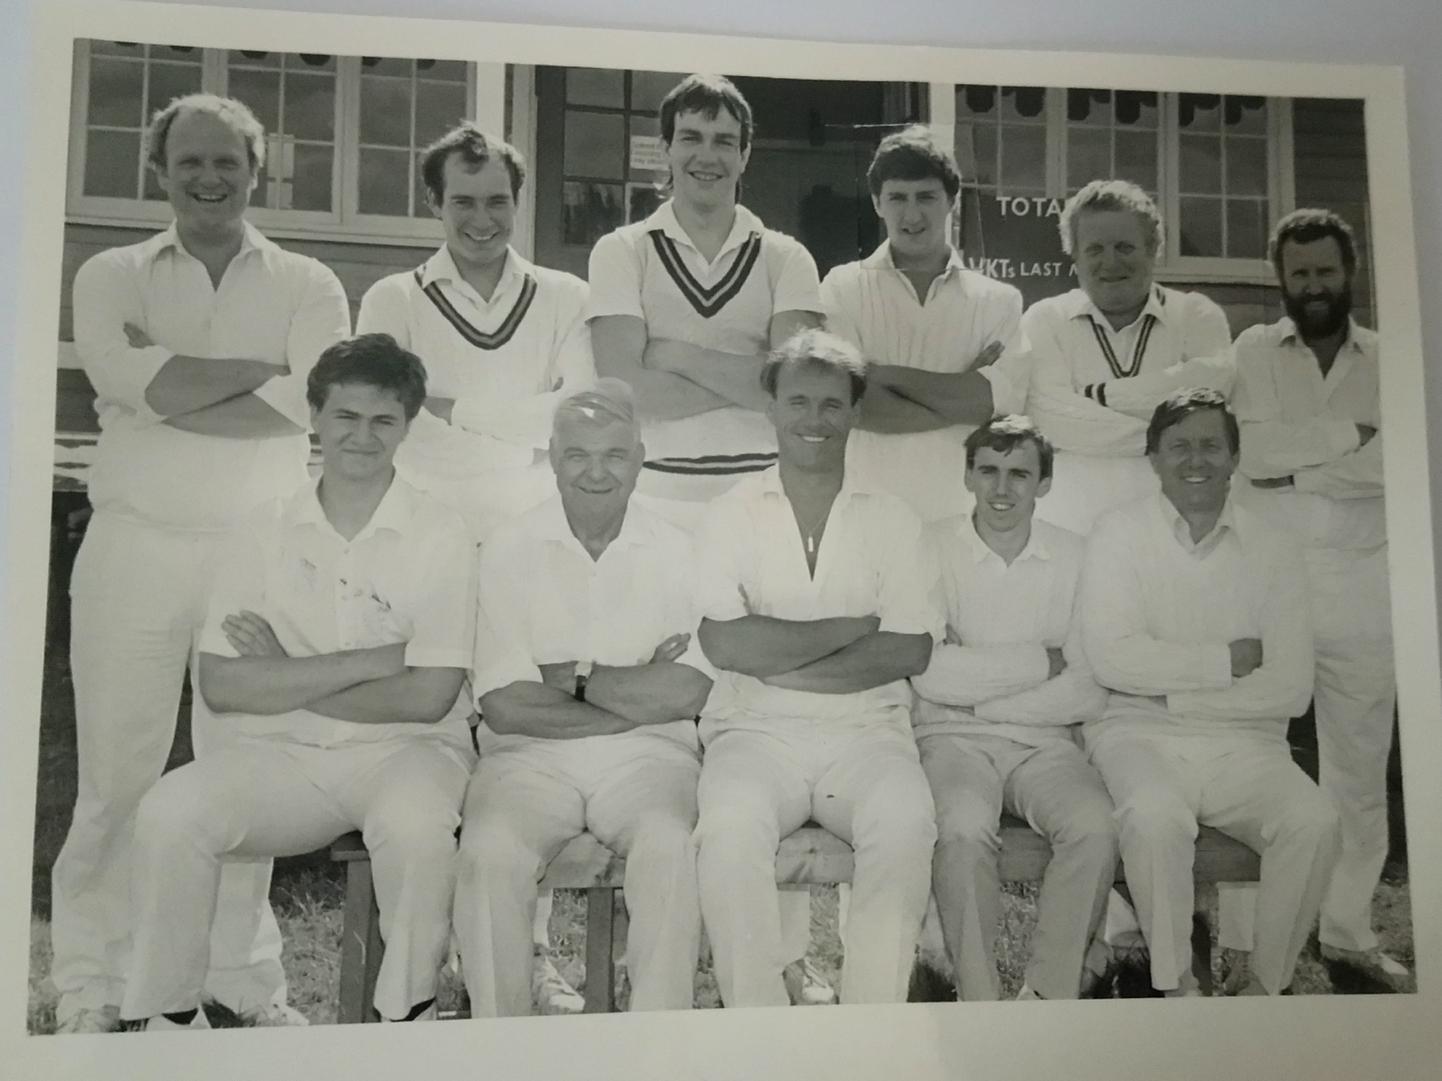 From 1985 and containing Ian Lowe (back row, third from the right) and Brian Wallington (back row, far right). I know this because I found their severed heads in another folder with captions on. I stuck them back on with Sellotape. Who needs Photoshop?